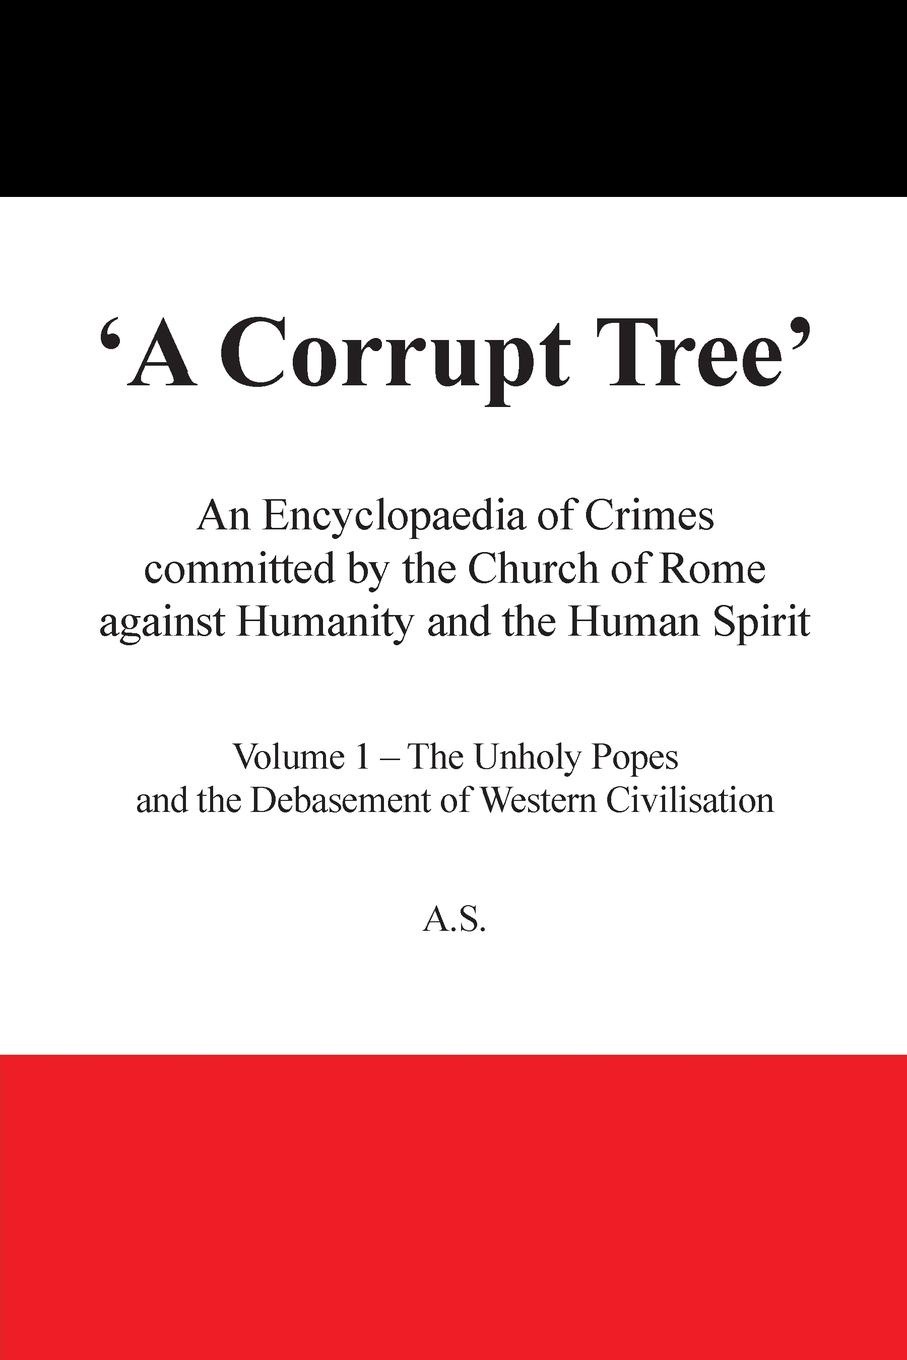 A Corrupt Tree. An Encyclopaedia of Crimes Committed by the Church of Rome Against Humanity and the Human Spirit